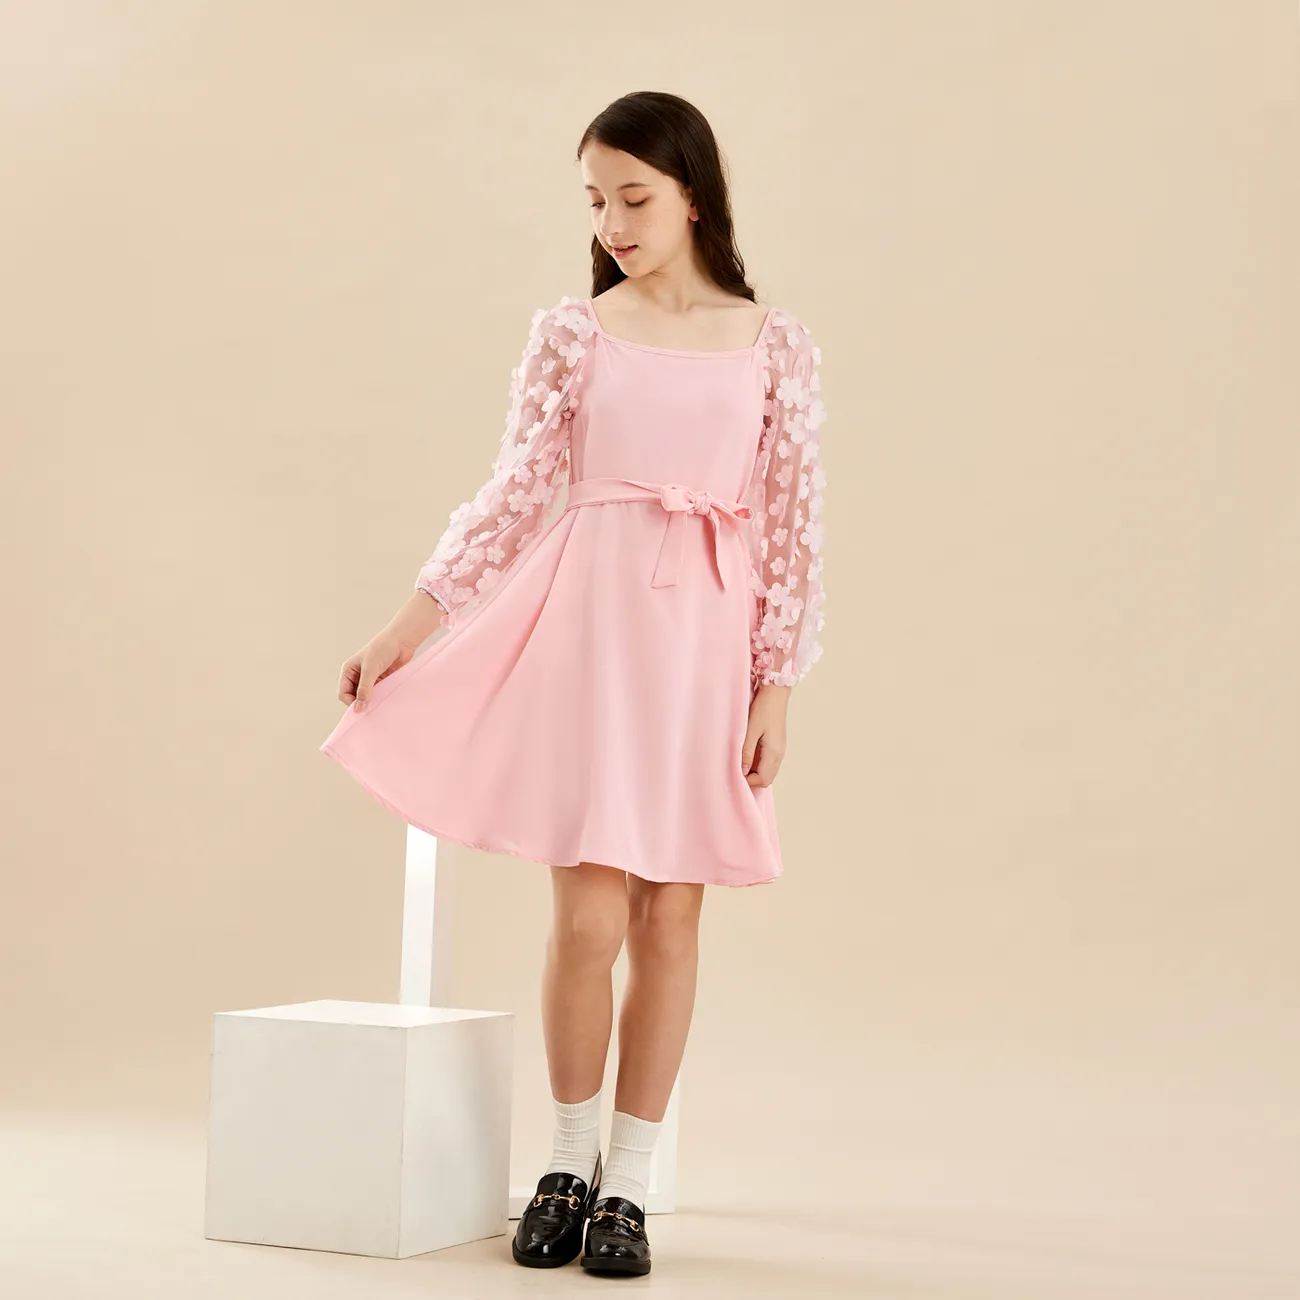 Kid Girl Flower Embroidery Square Neck Mesh Long-sleeve Dress with Bow Belt Pink big image 1